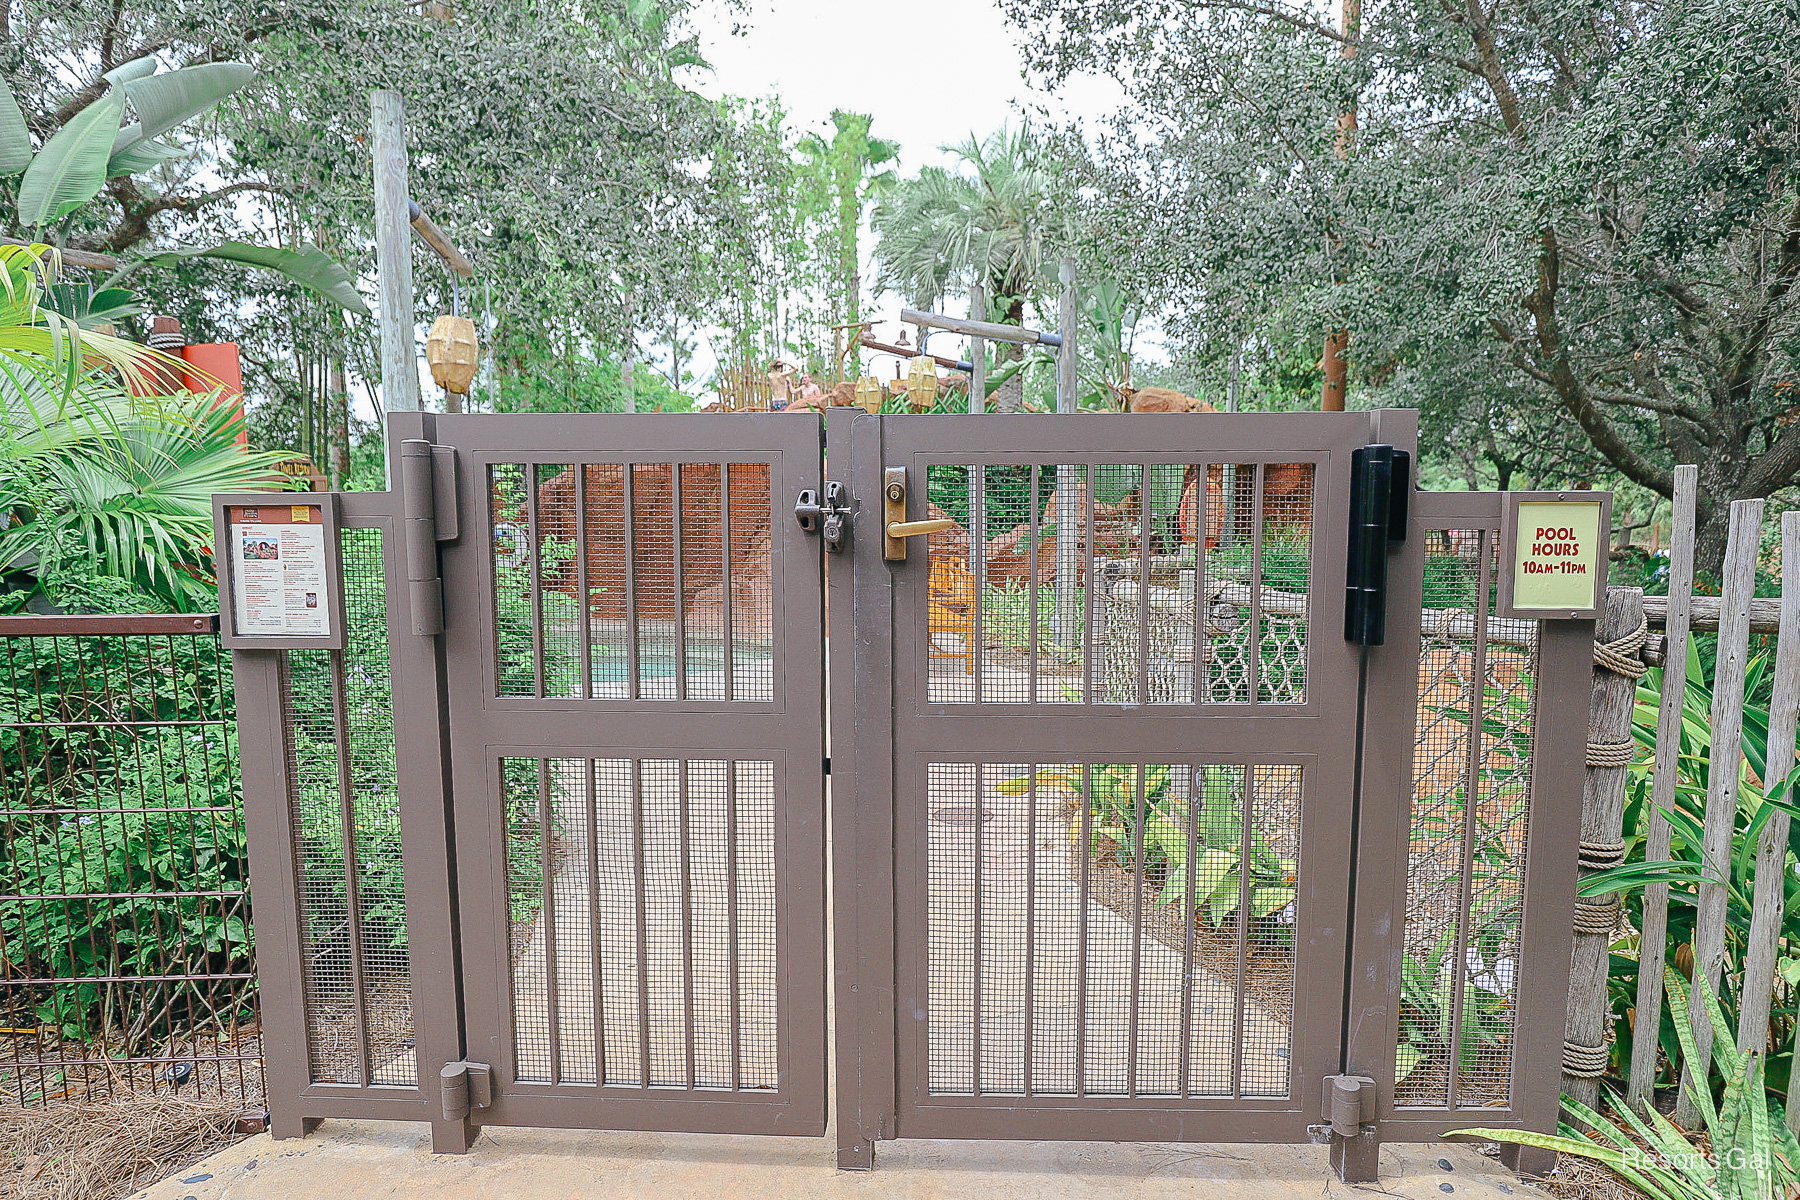 pool gates with posted pool hours 